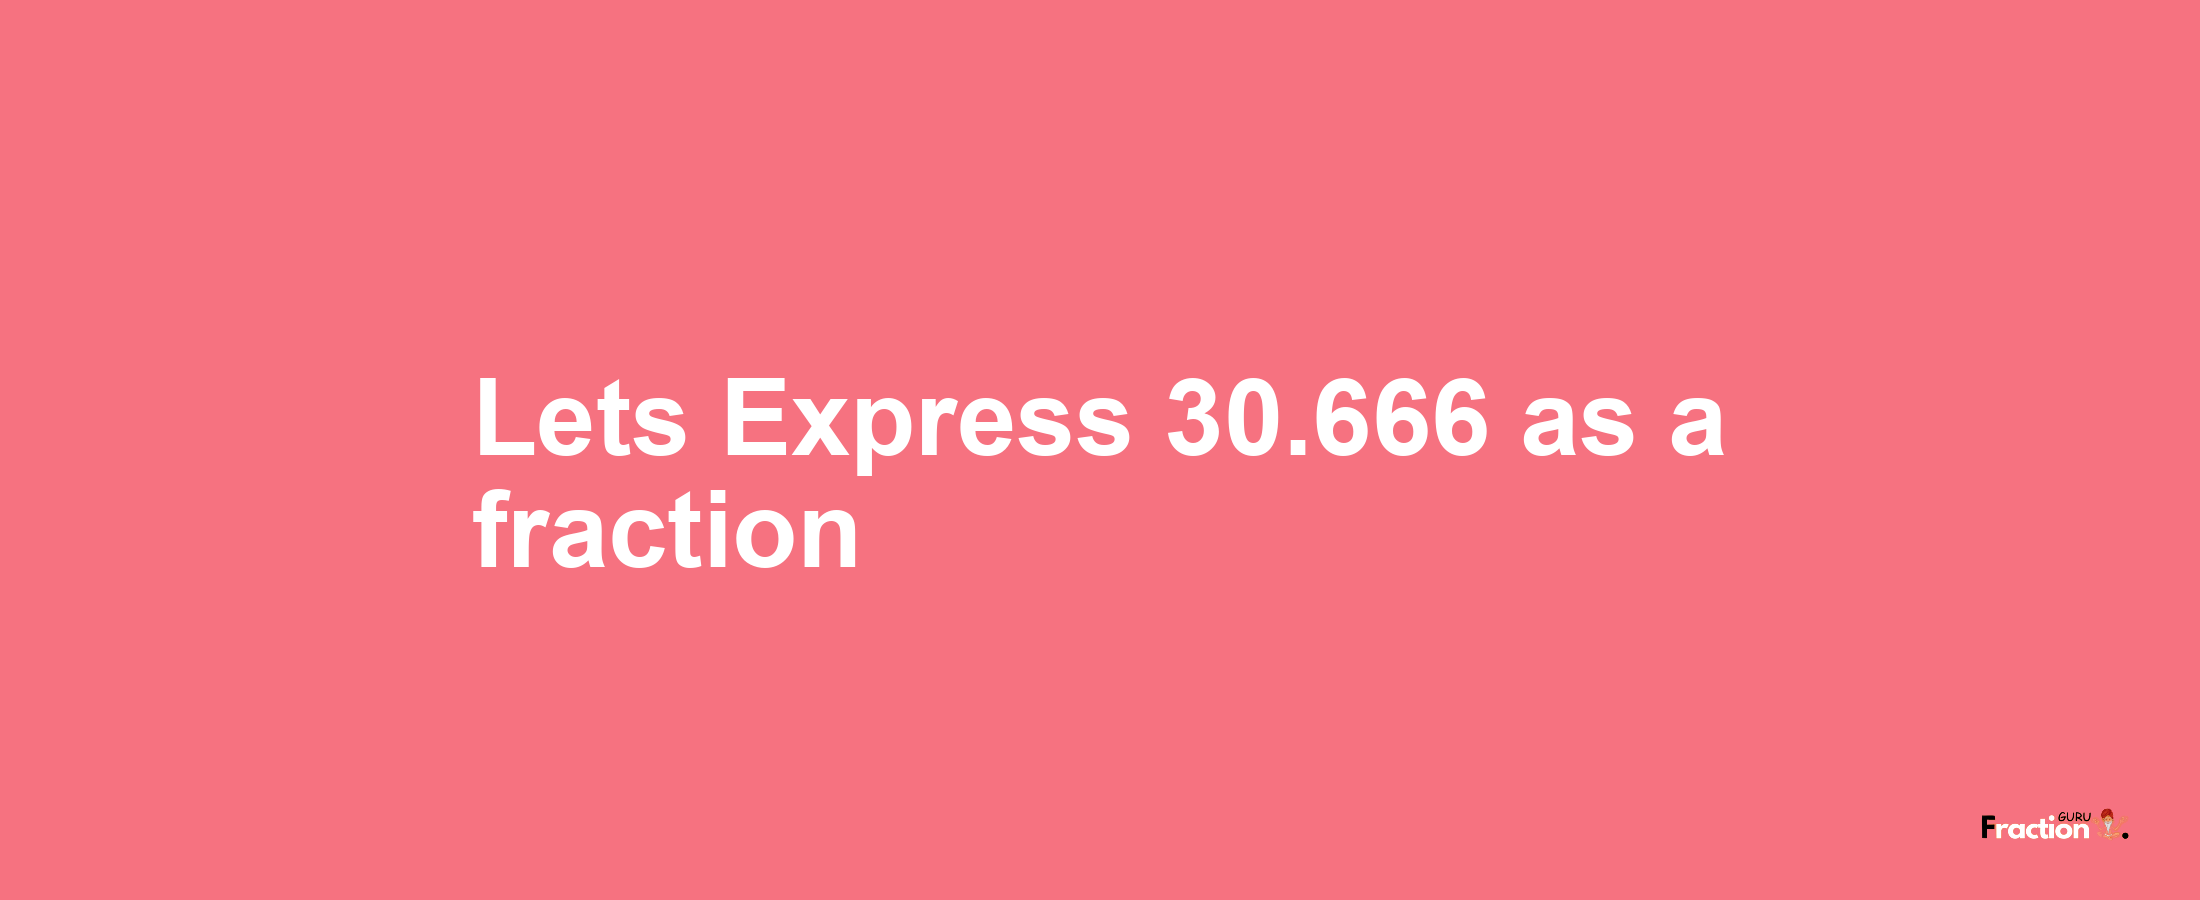 Lets Express 30.666 as afraction